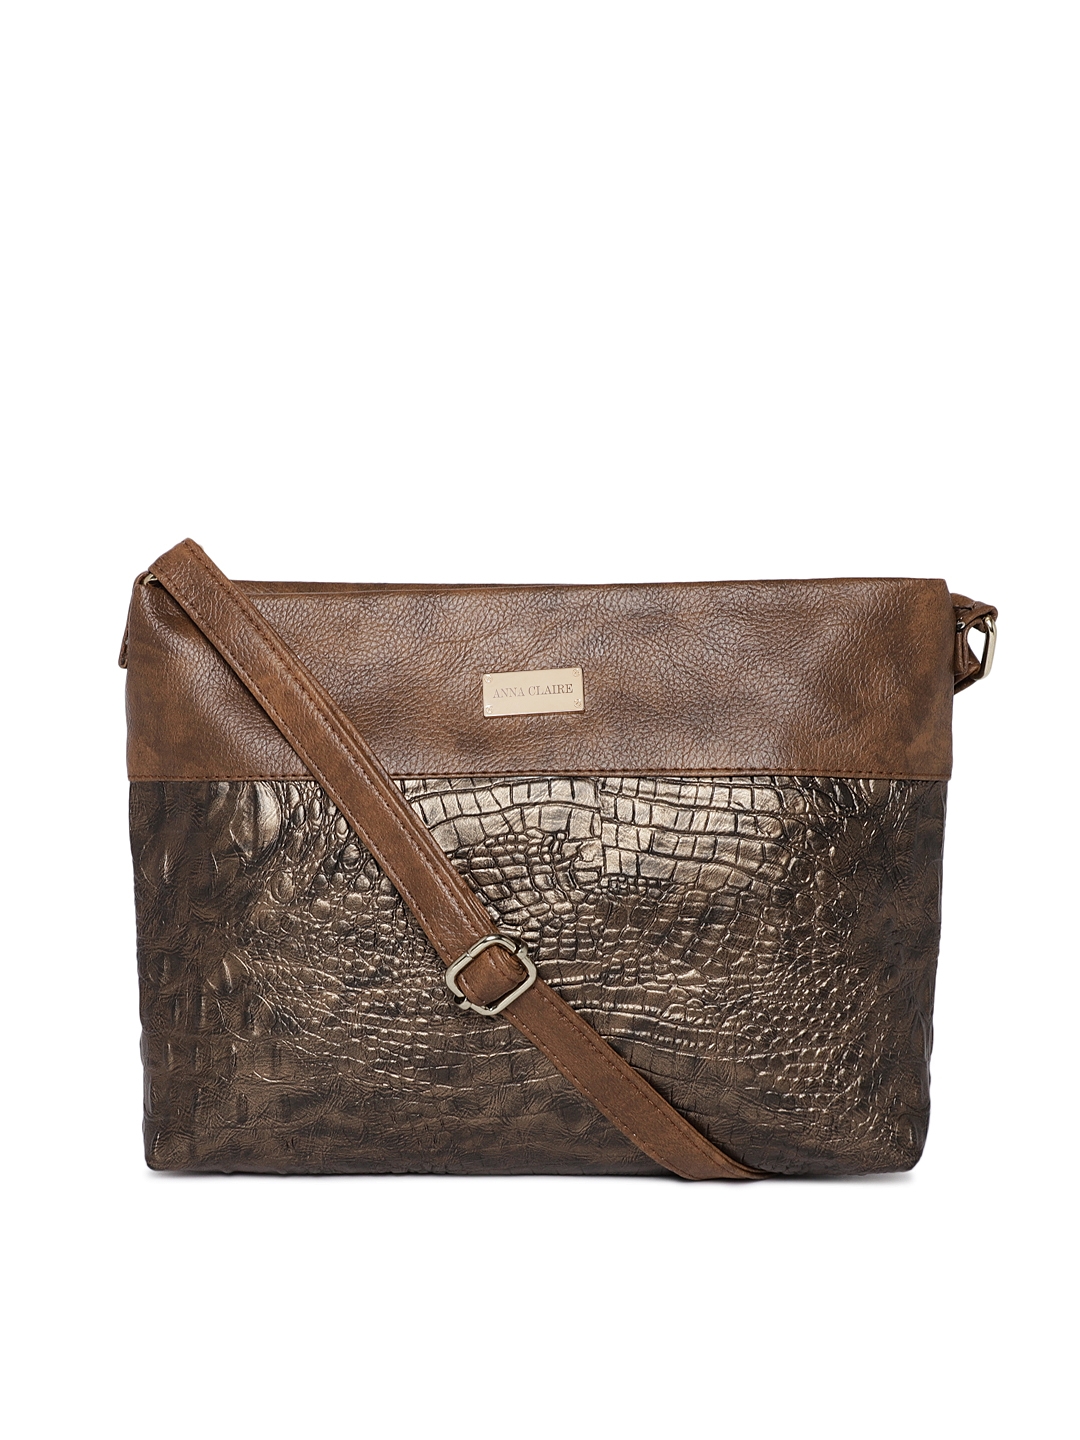 Buy Anna Claire Brown Animal Skin Textured Leather Sling Bag - Handbags for  Women 11028580 | Myntra